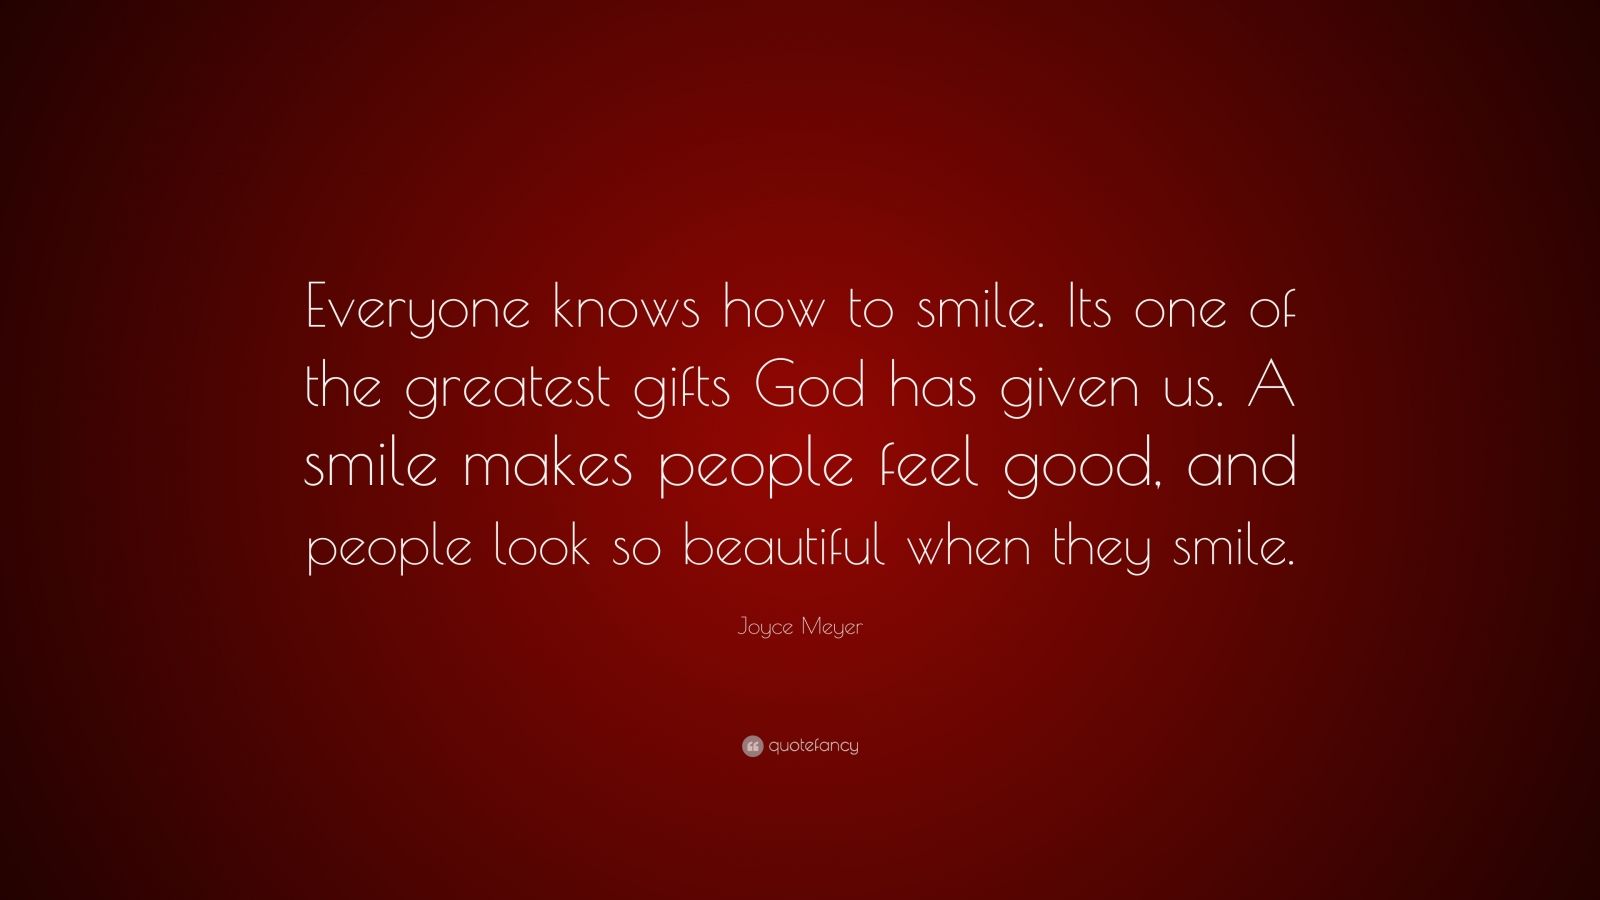 Joyce Meyer Quote: “Everyone knows how to smile. Its one of the